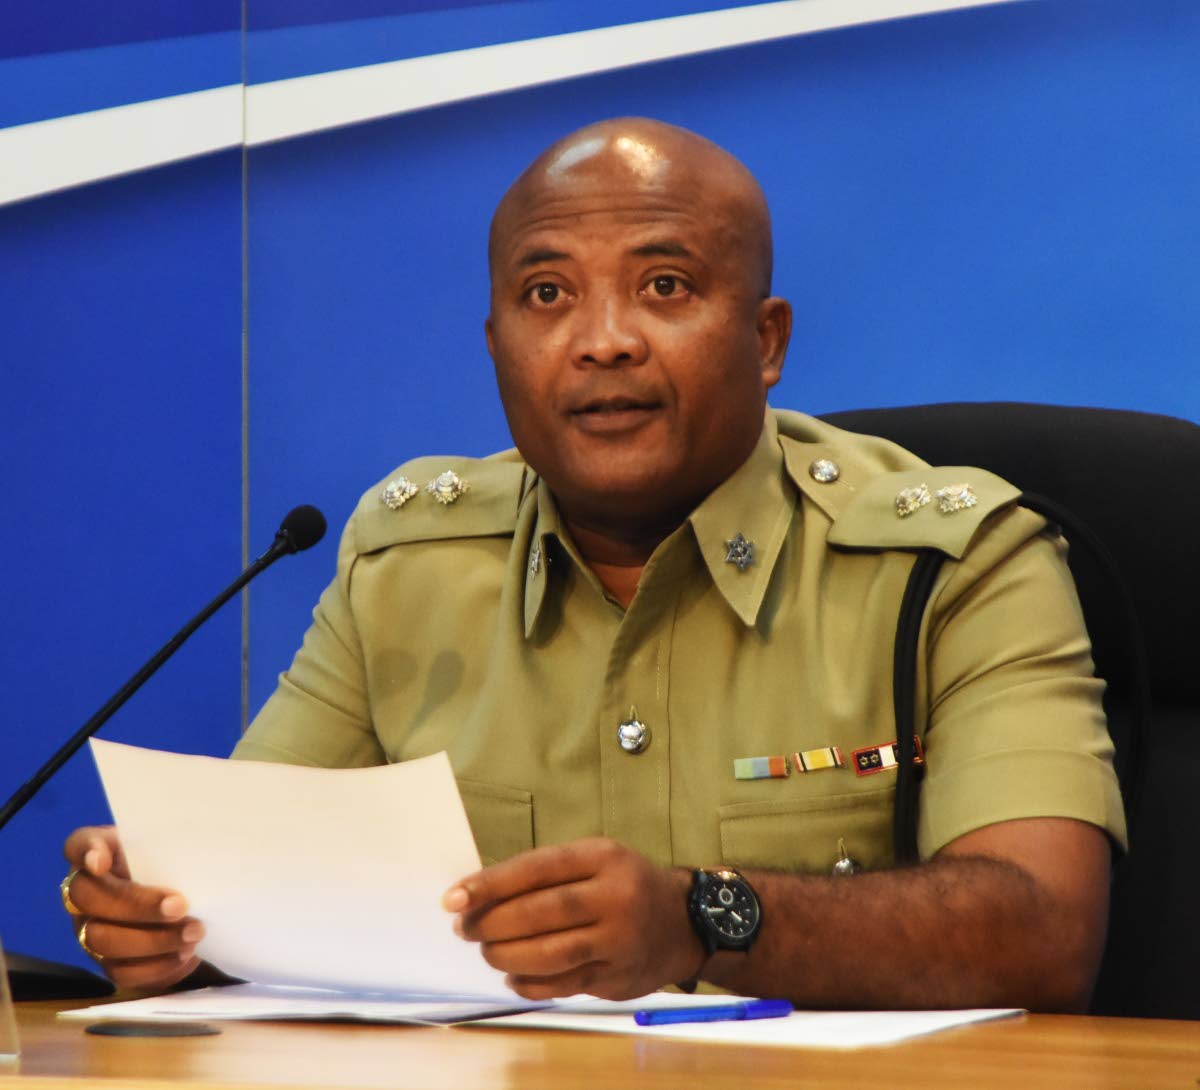 Mystar advises citizens, “Come to police” when choosing institutions for family